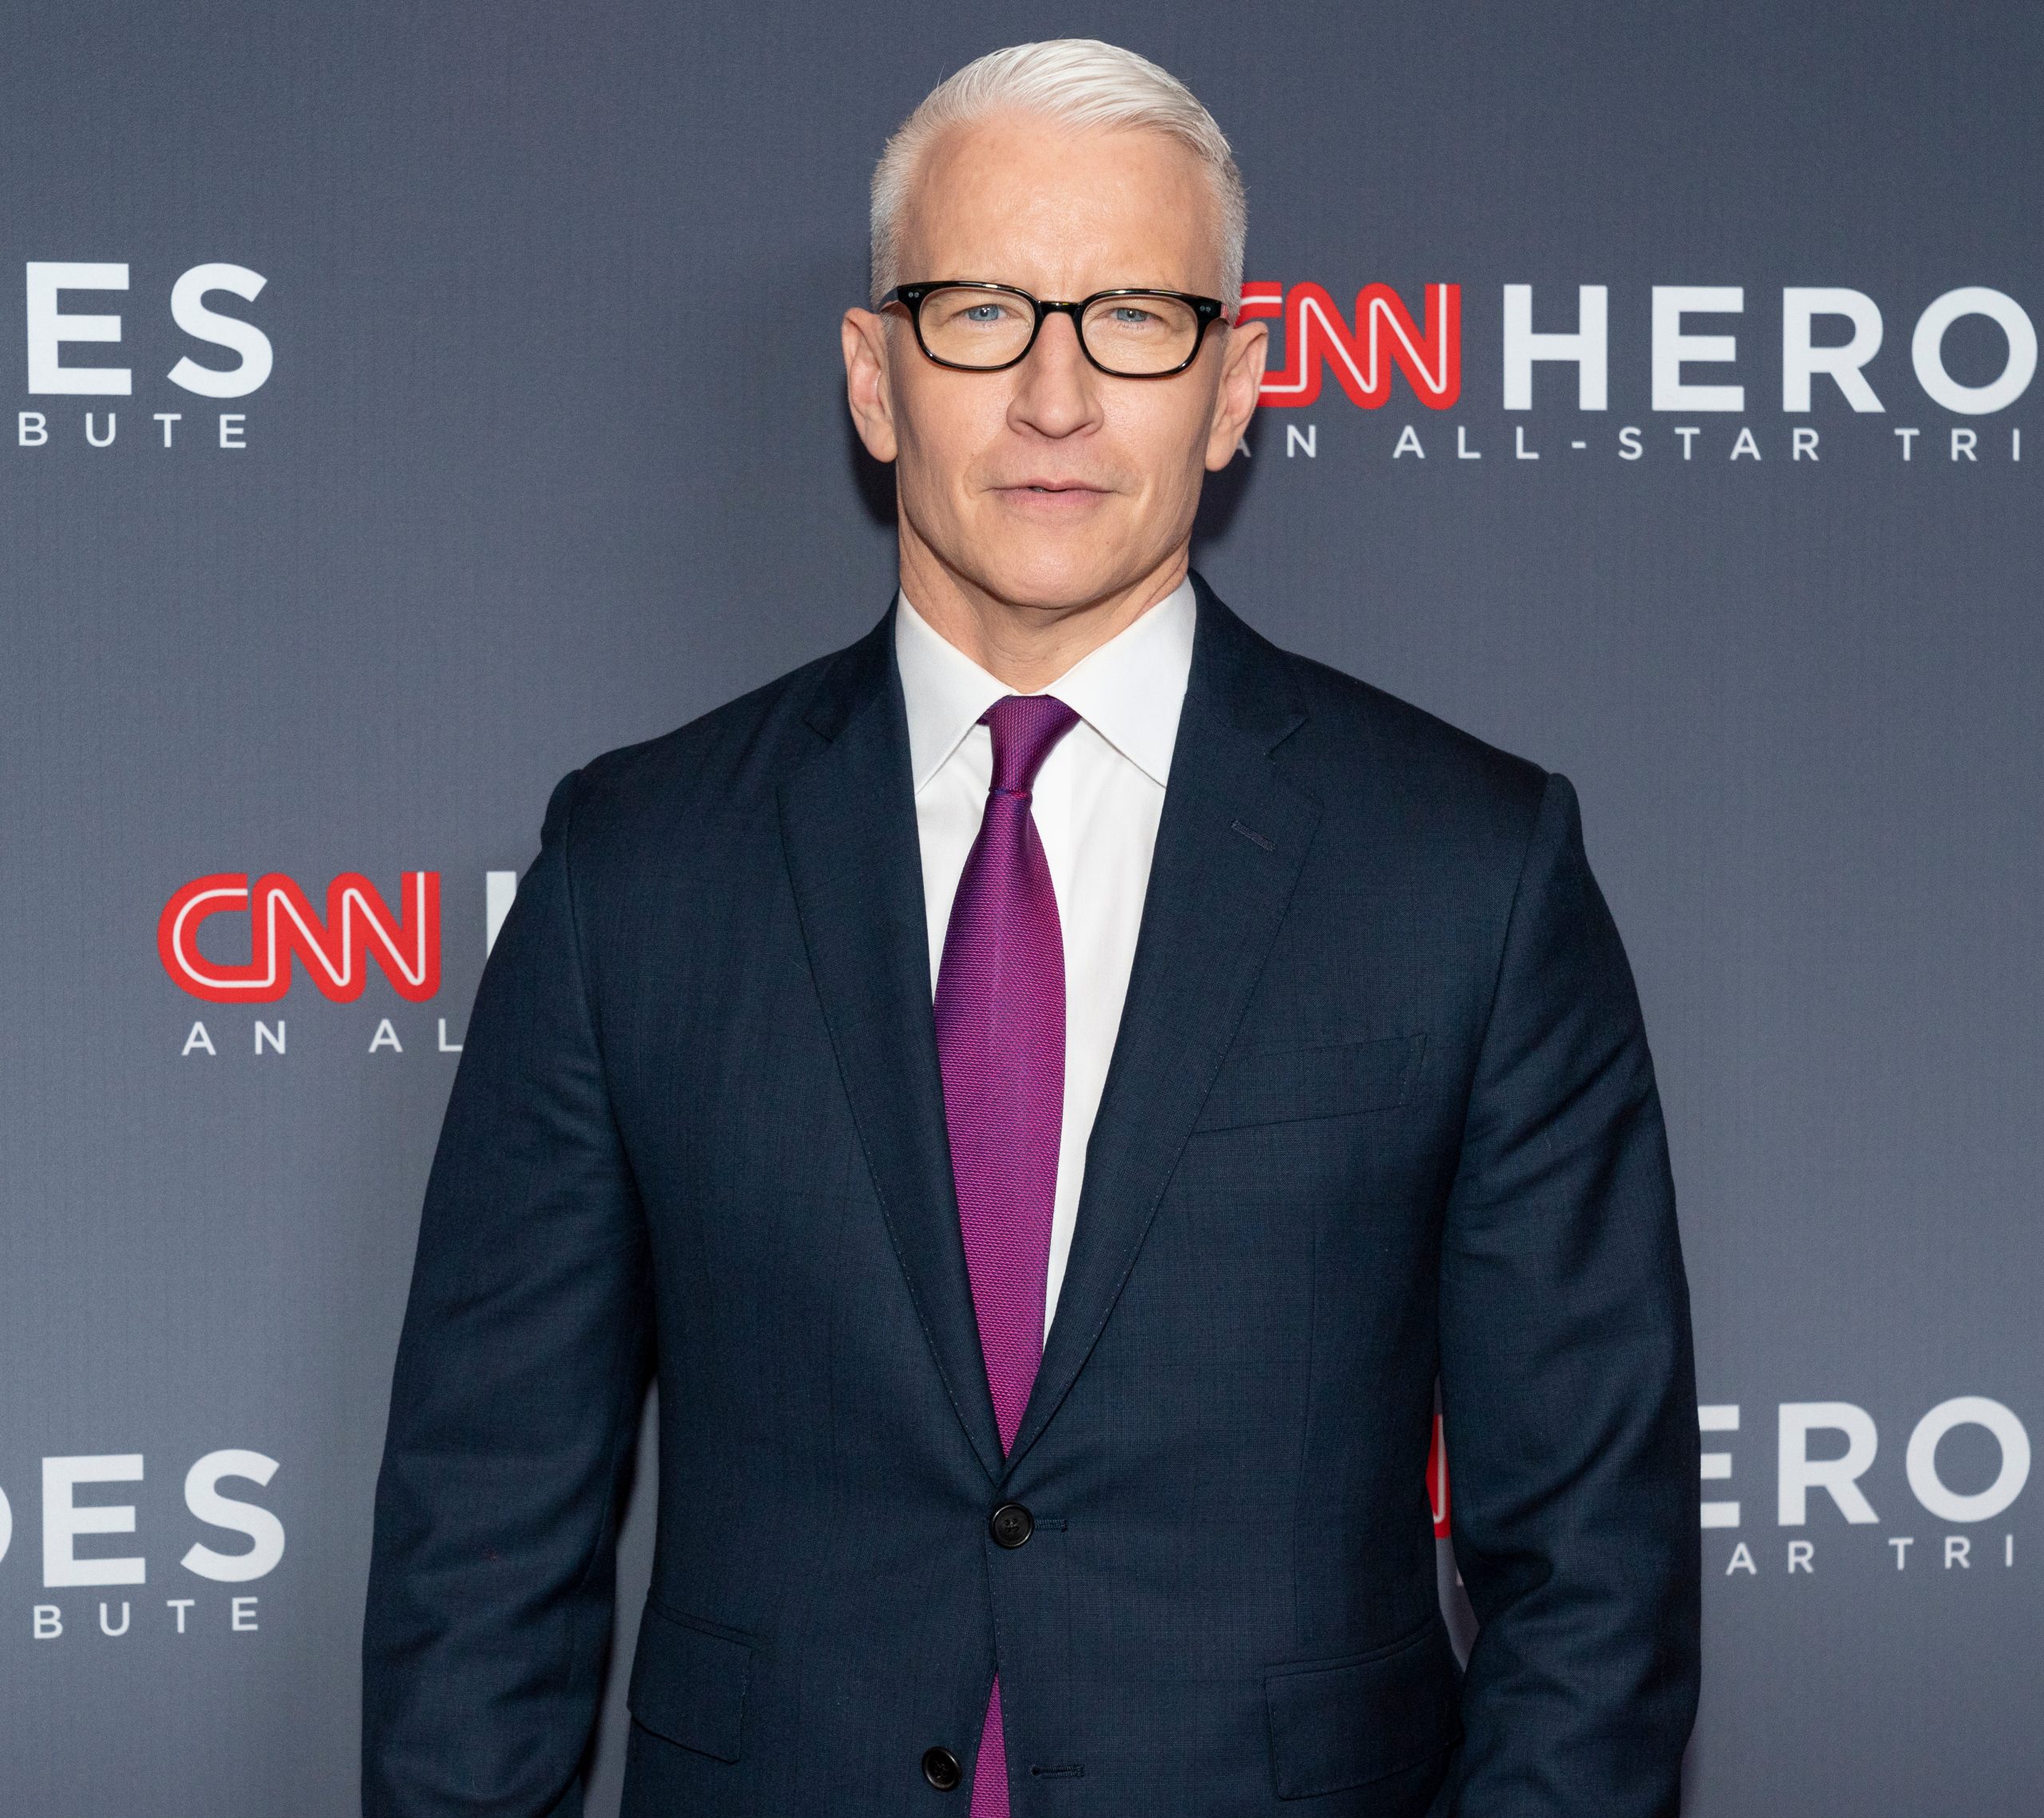 Celebrity Anderson Cooper shares adorable Christmas photos of sons, fans and friends cheer